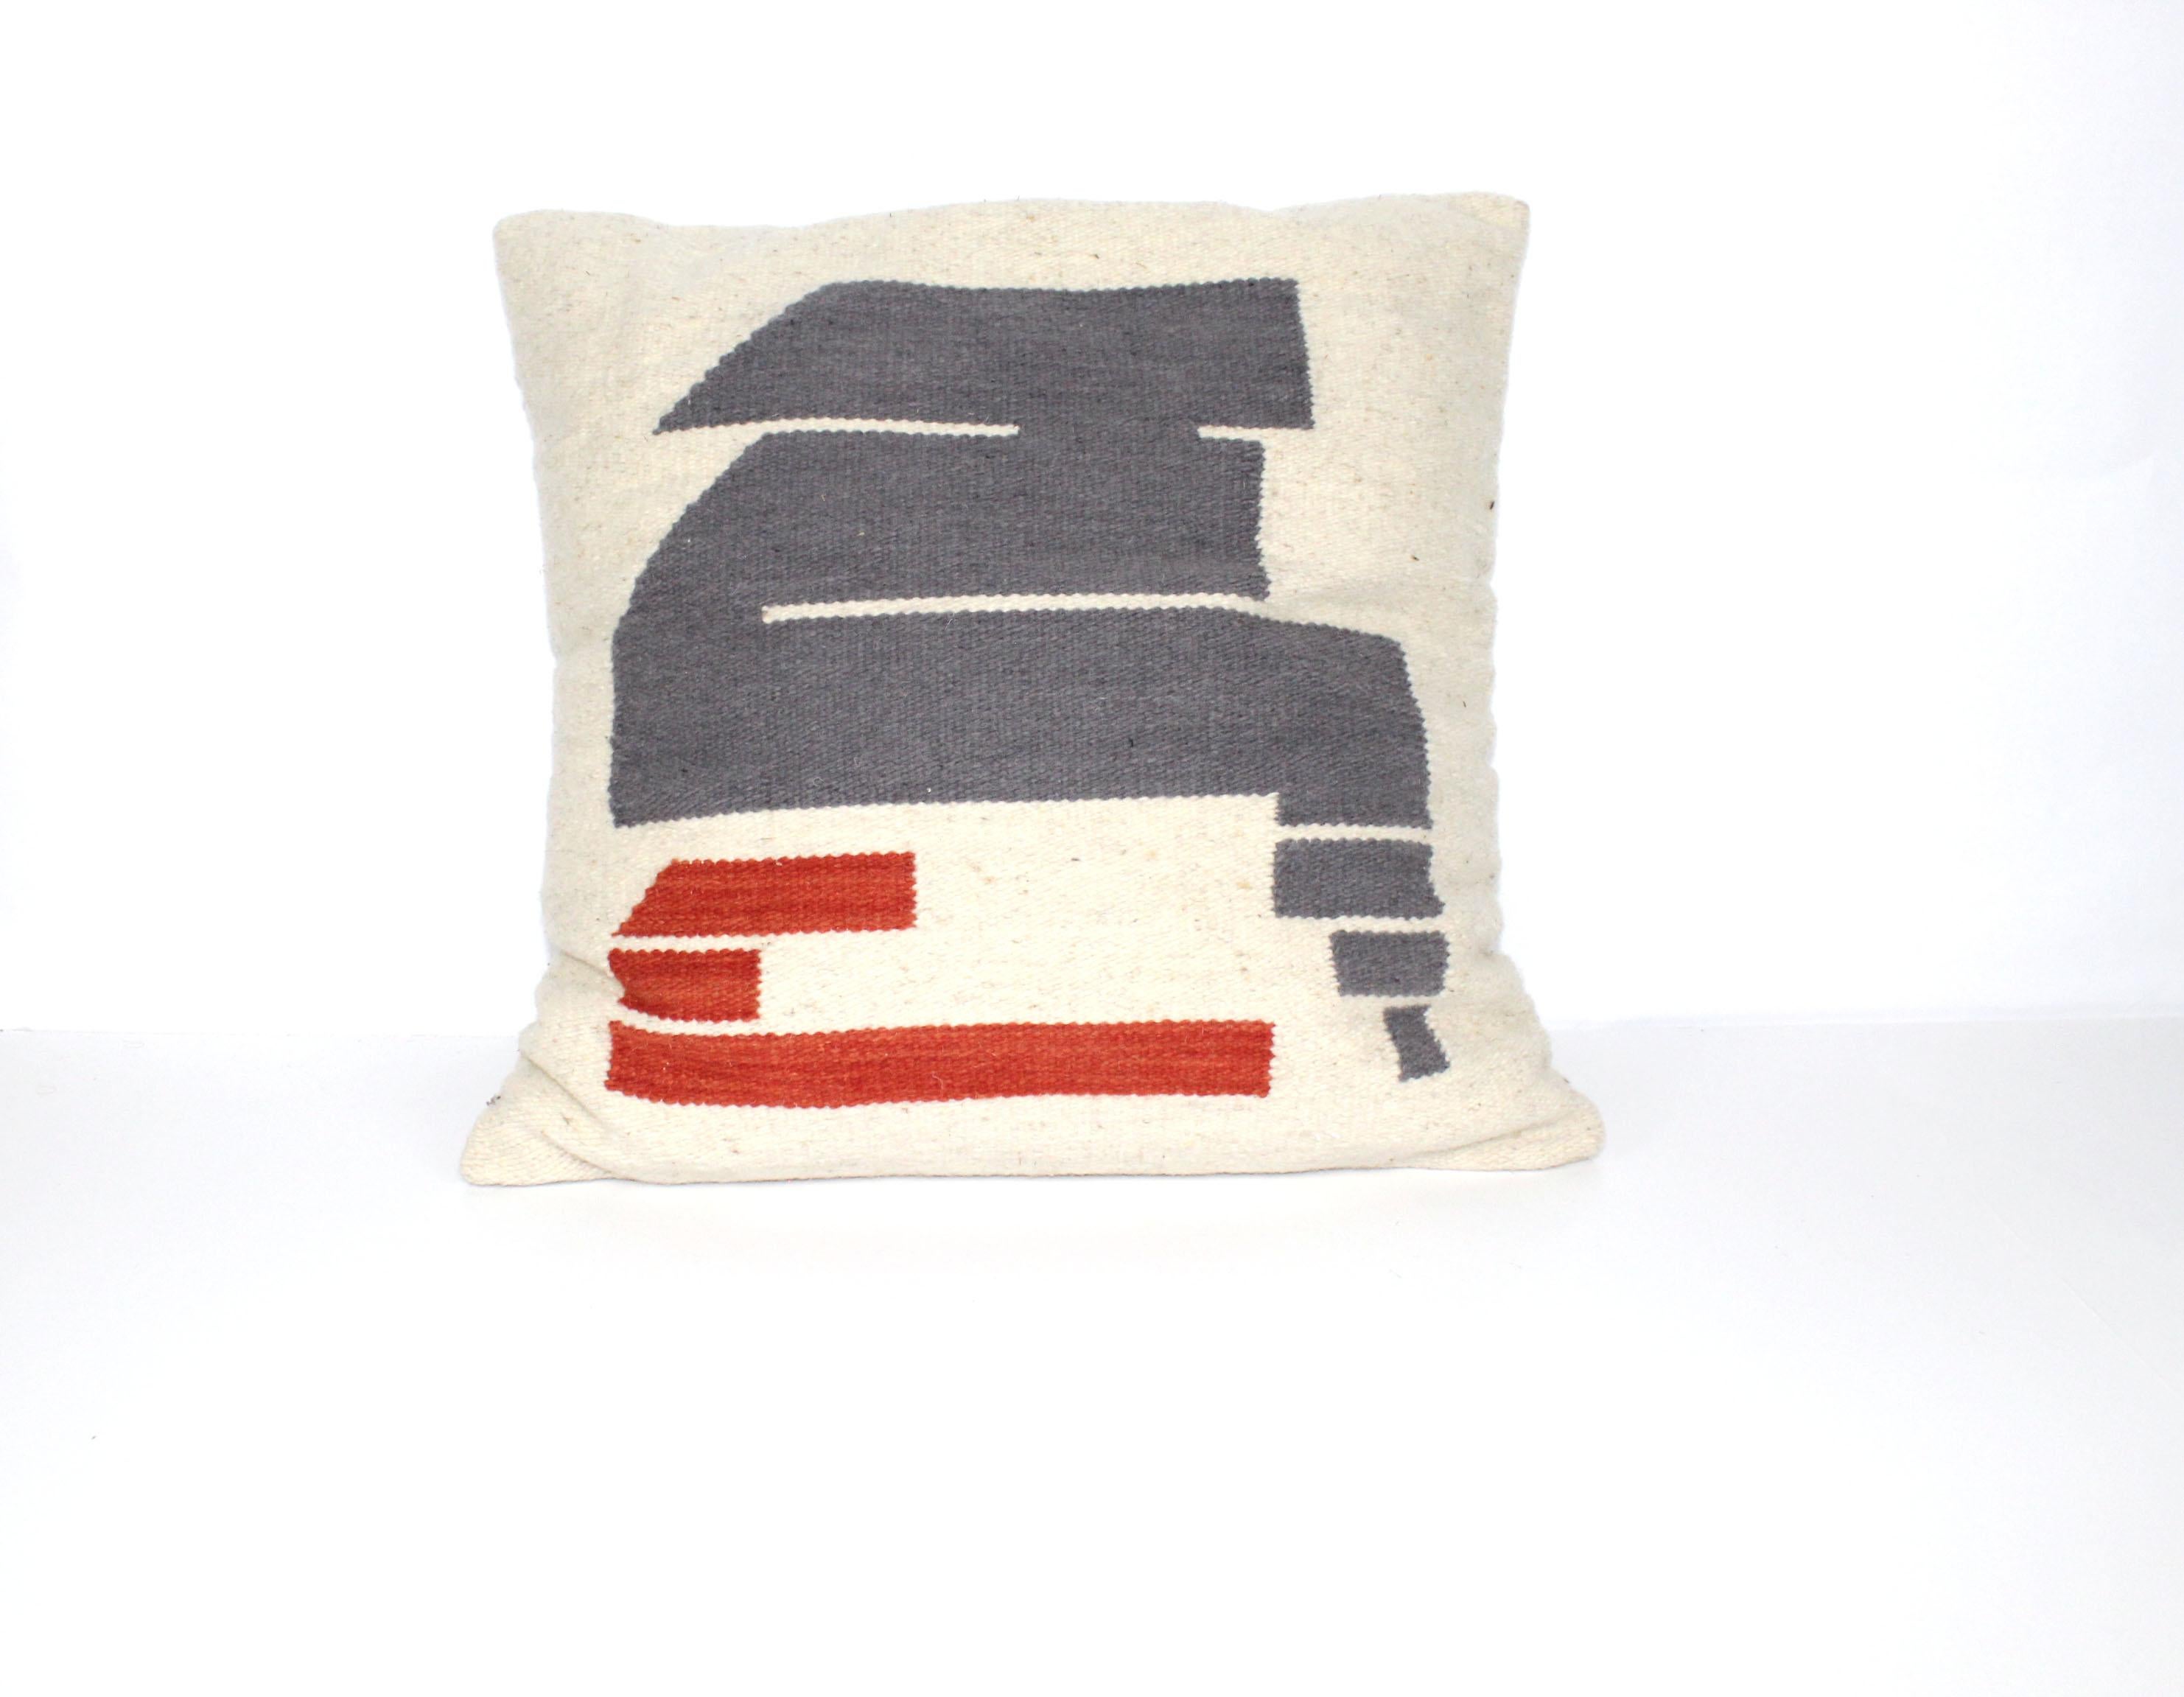 Bespoke set of Handwoven Throw Pillows In New Condition For Sale In Brooklyn, NY